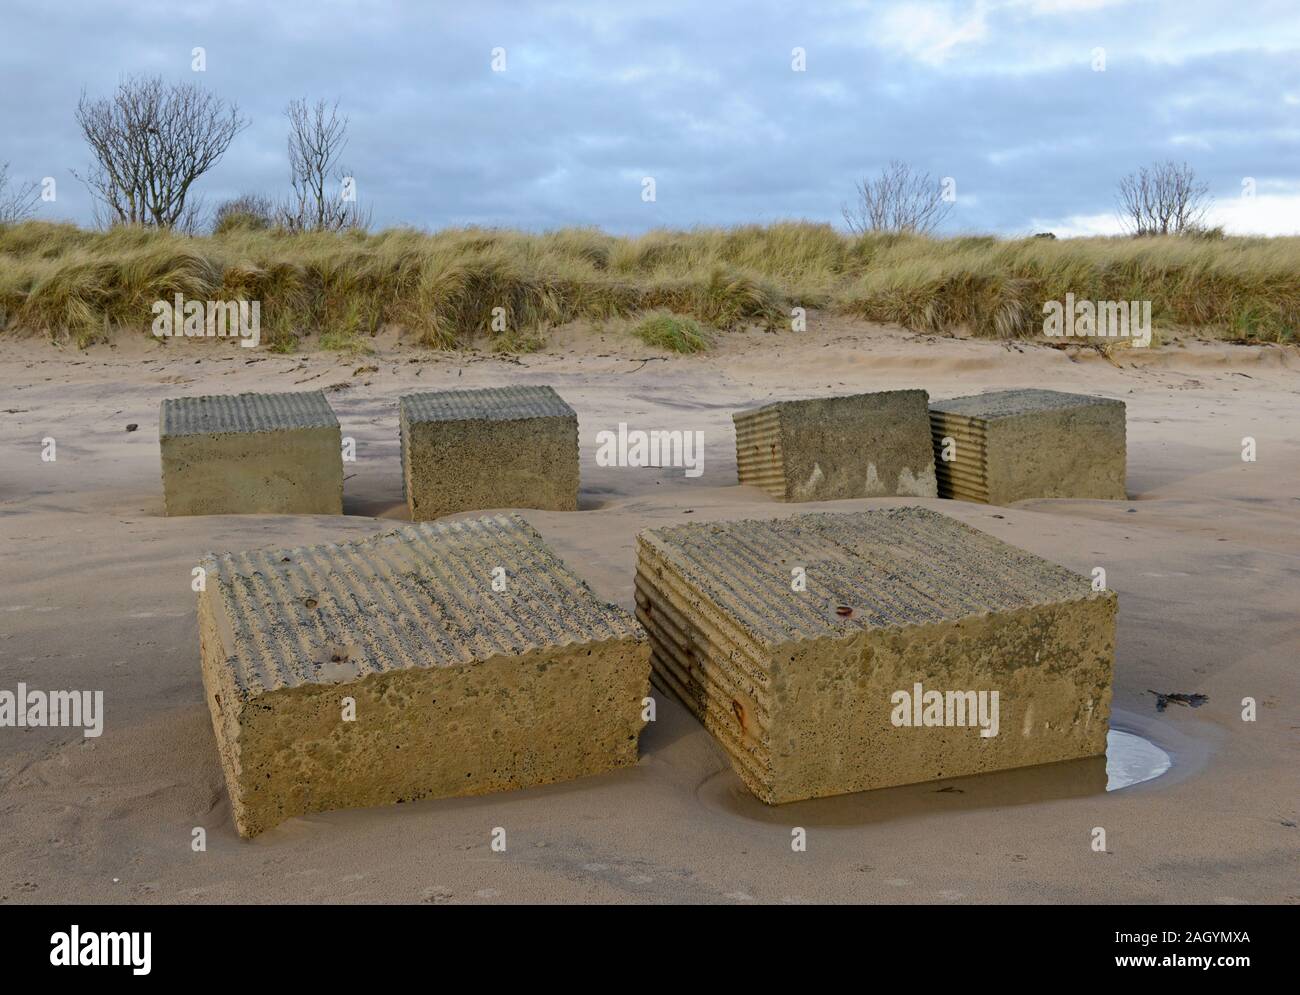 World War two anti-tank barricades remain in place seventy years on, on Alnmouth beach, Northumberland, UK Stock Photo